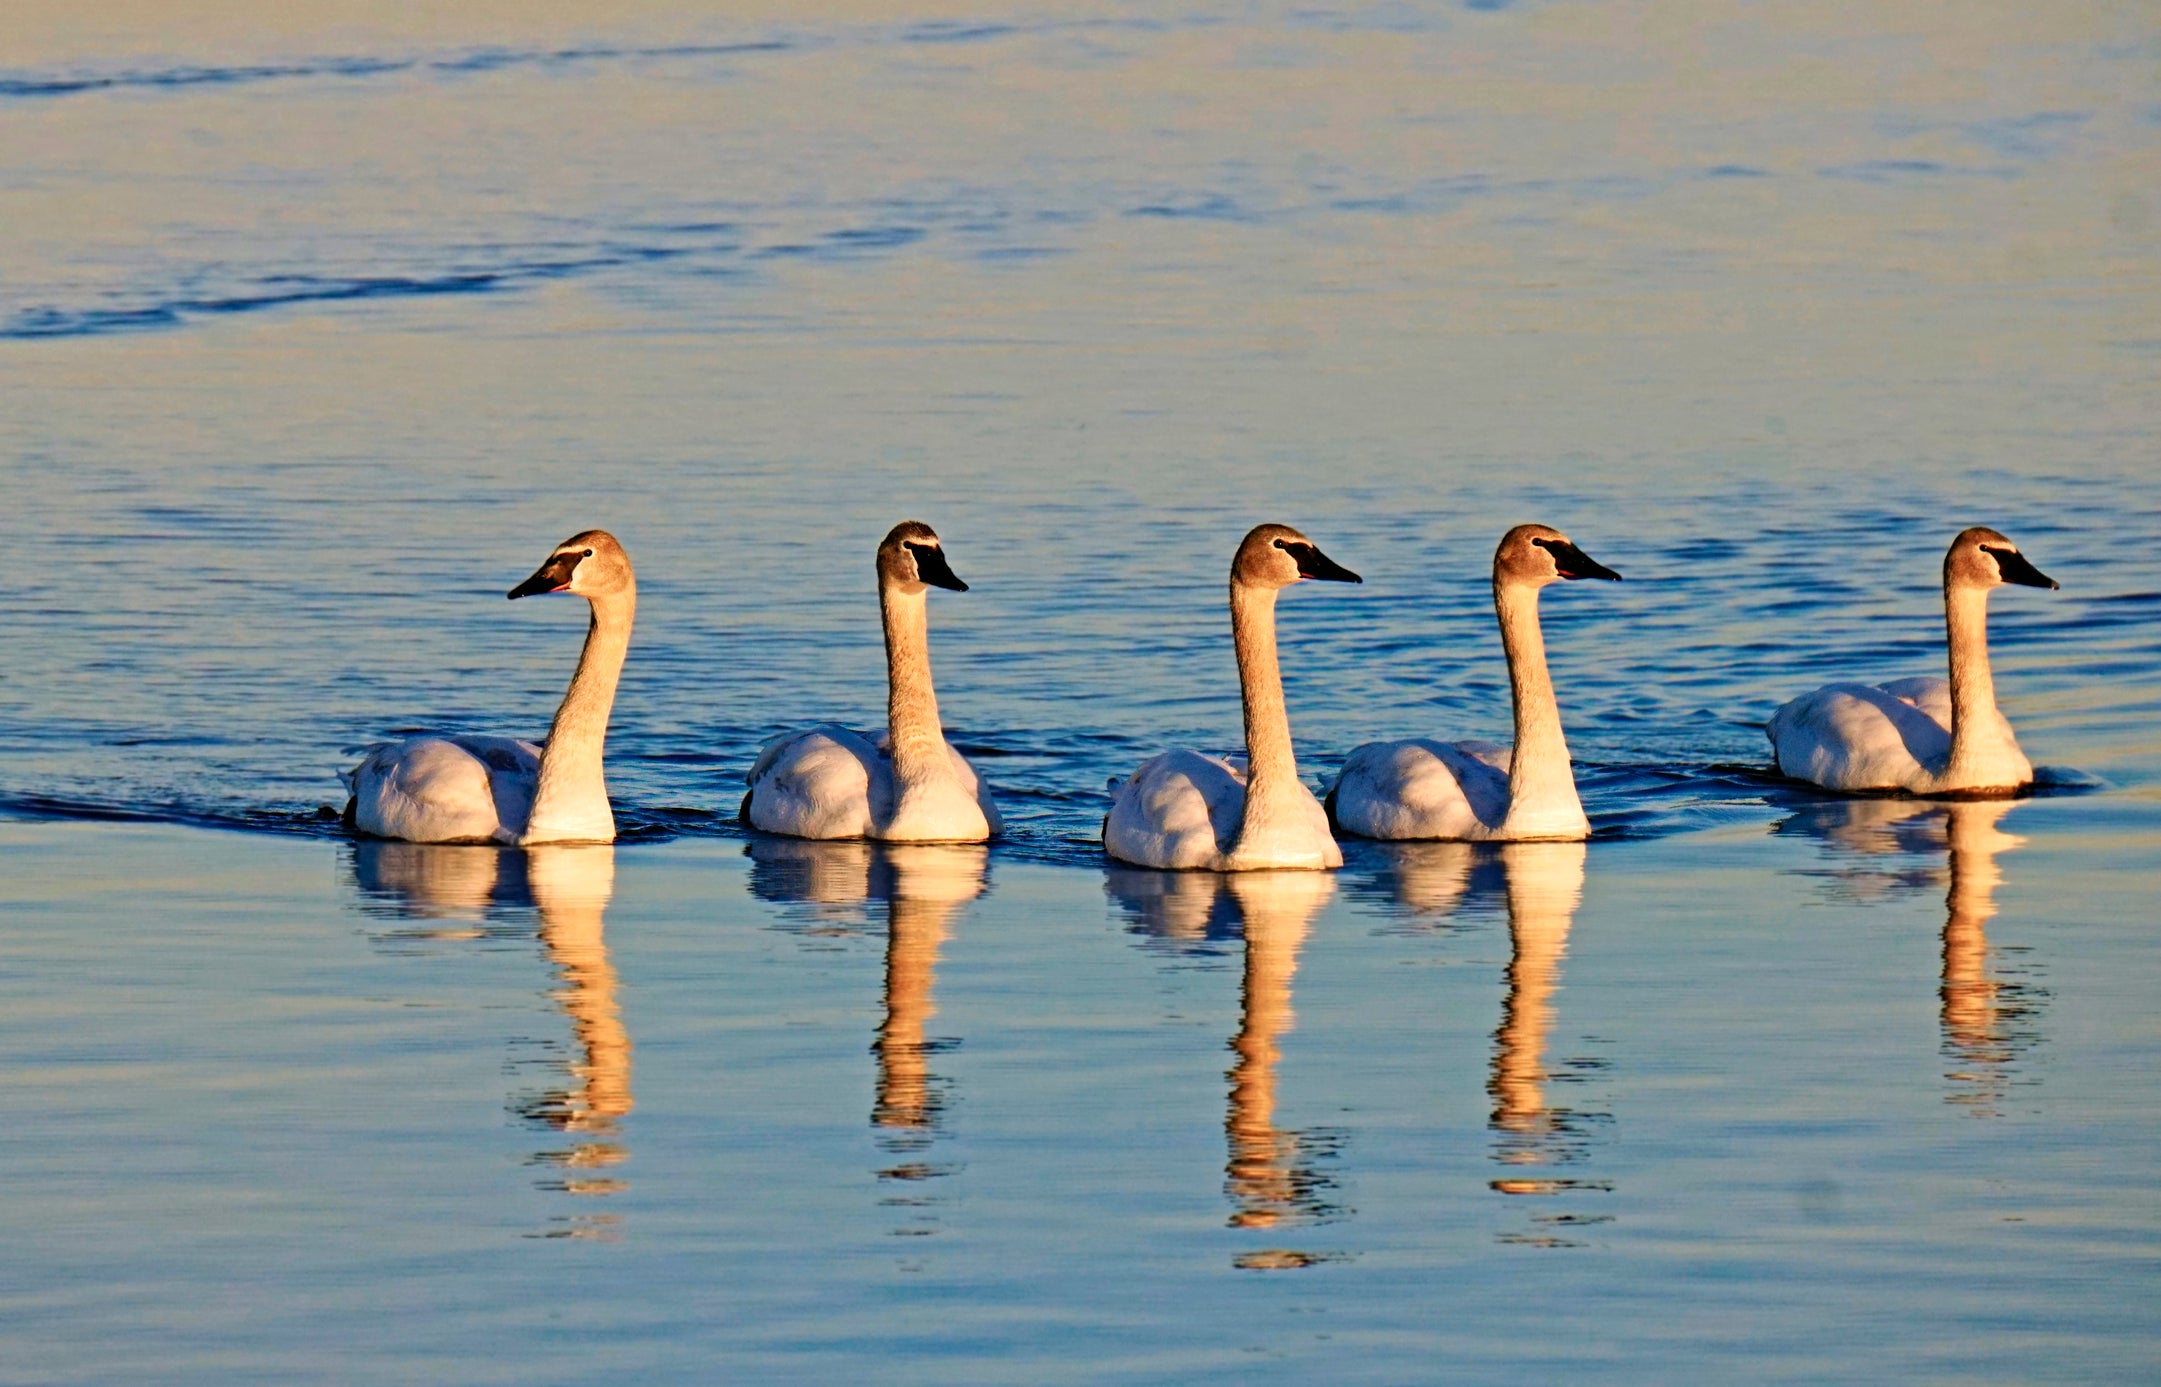 A group of Trumpeter juvenile cygnets in Toronto